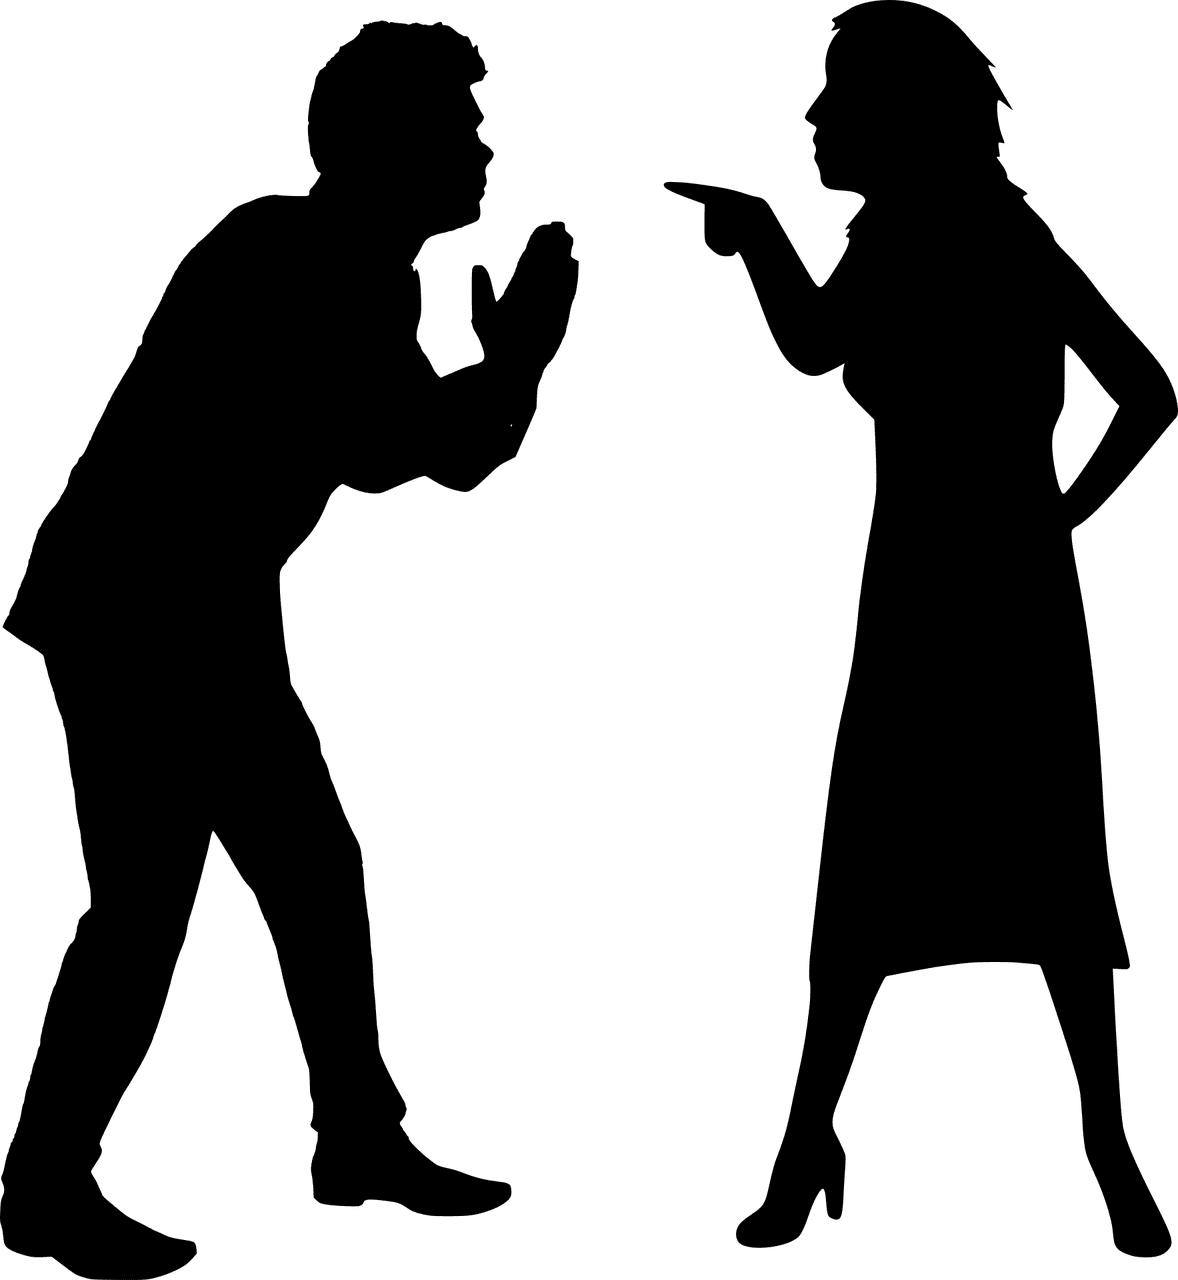 A silhouette of a couple fighting | Source: Pixabay